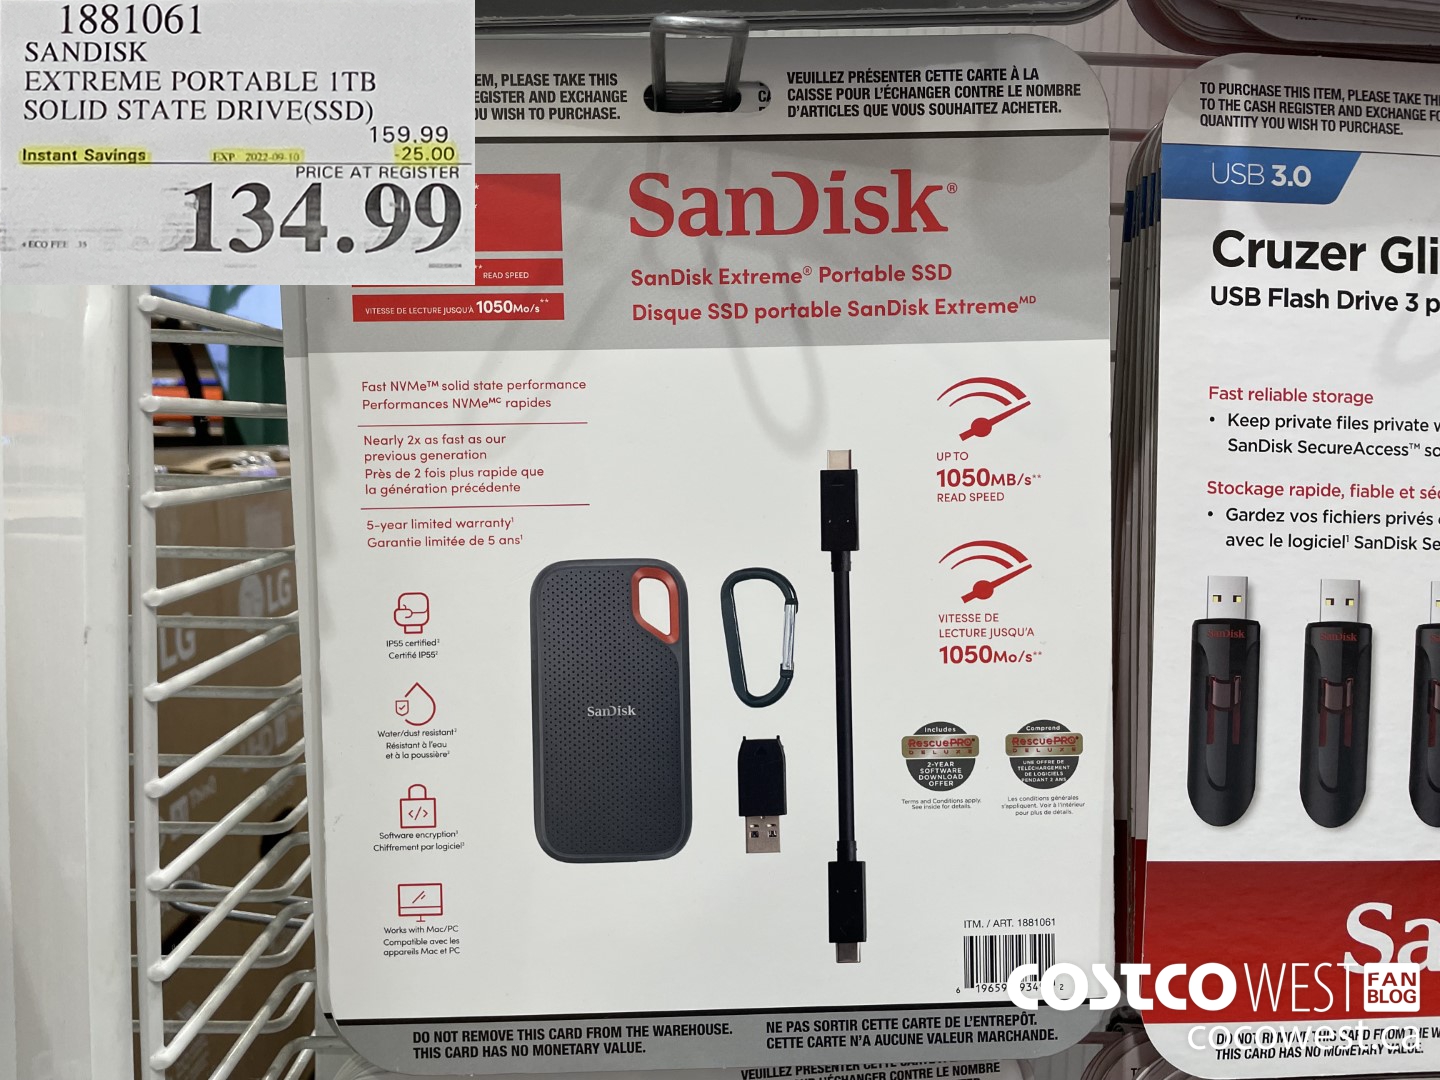 https://west.cocowest1.ca/2022/08/SANDISK_EXTREME_PORTABLE_1TB_SOLID_STATE_DRIVESSD_20220829_97953.jpg